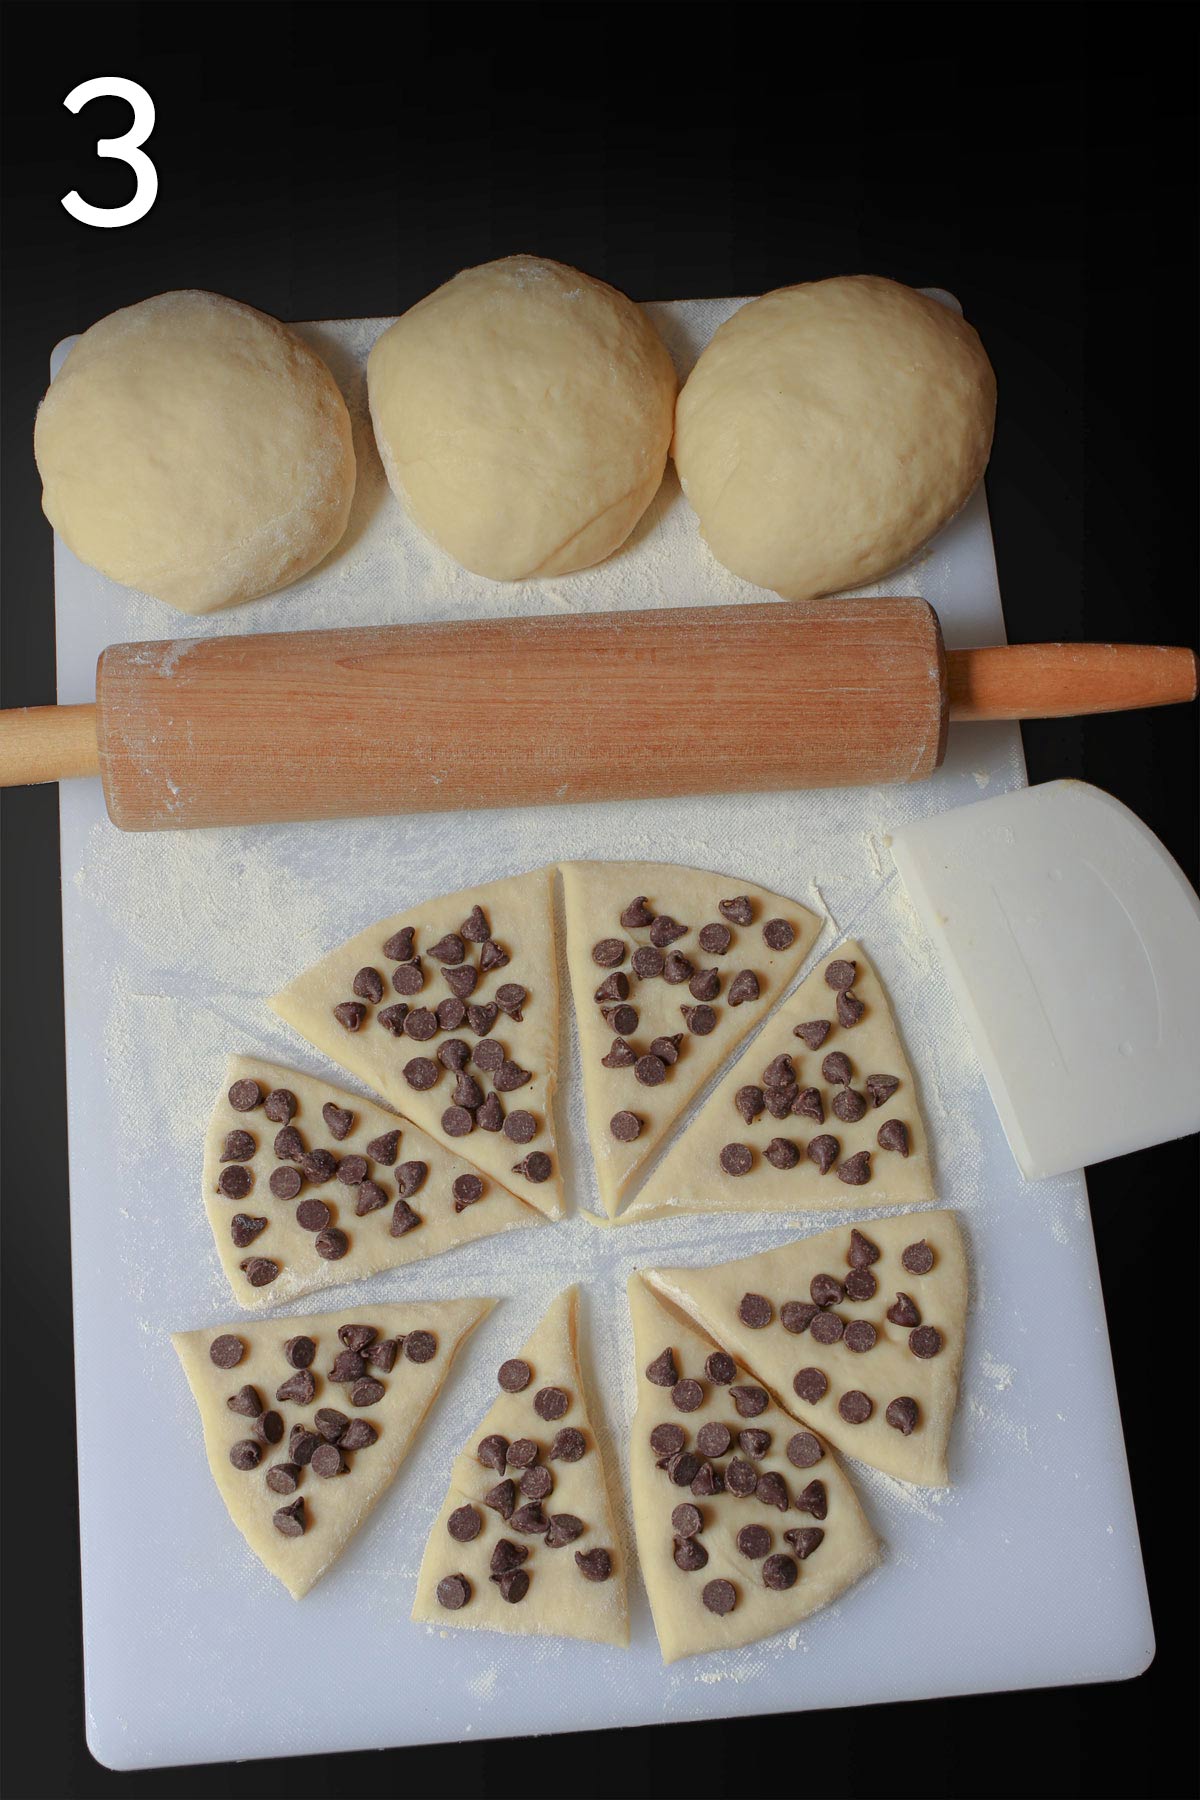 chocolate chips laid out on each of the wedges of dough.